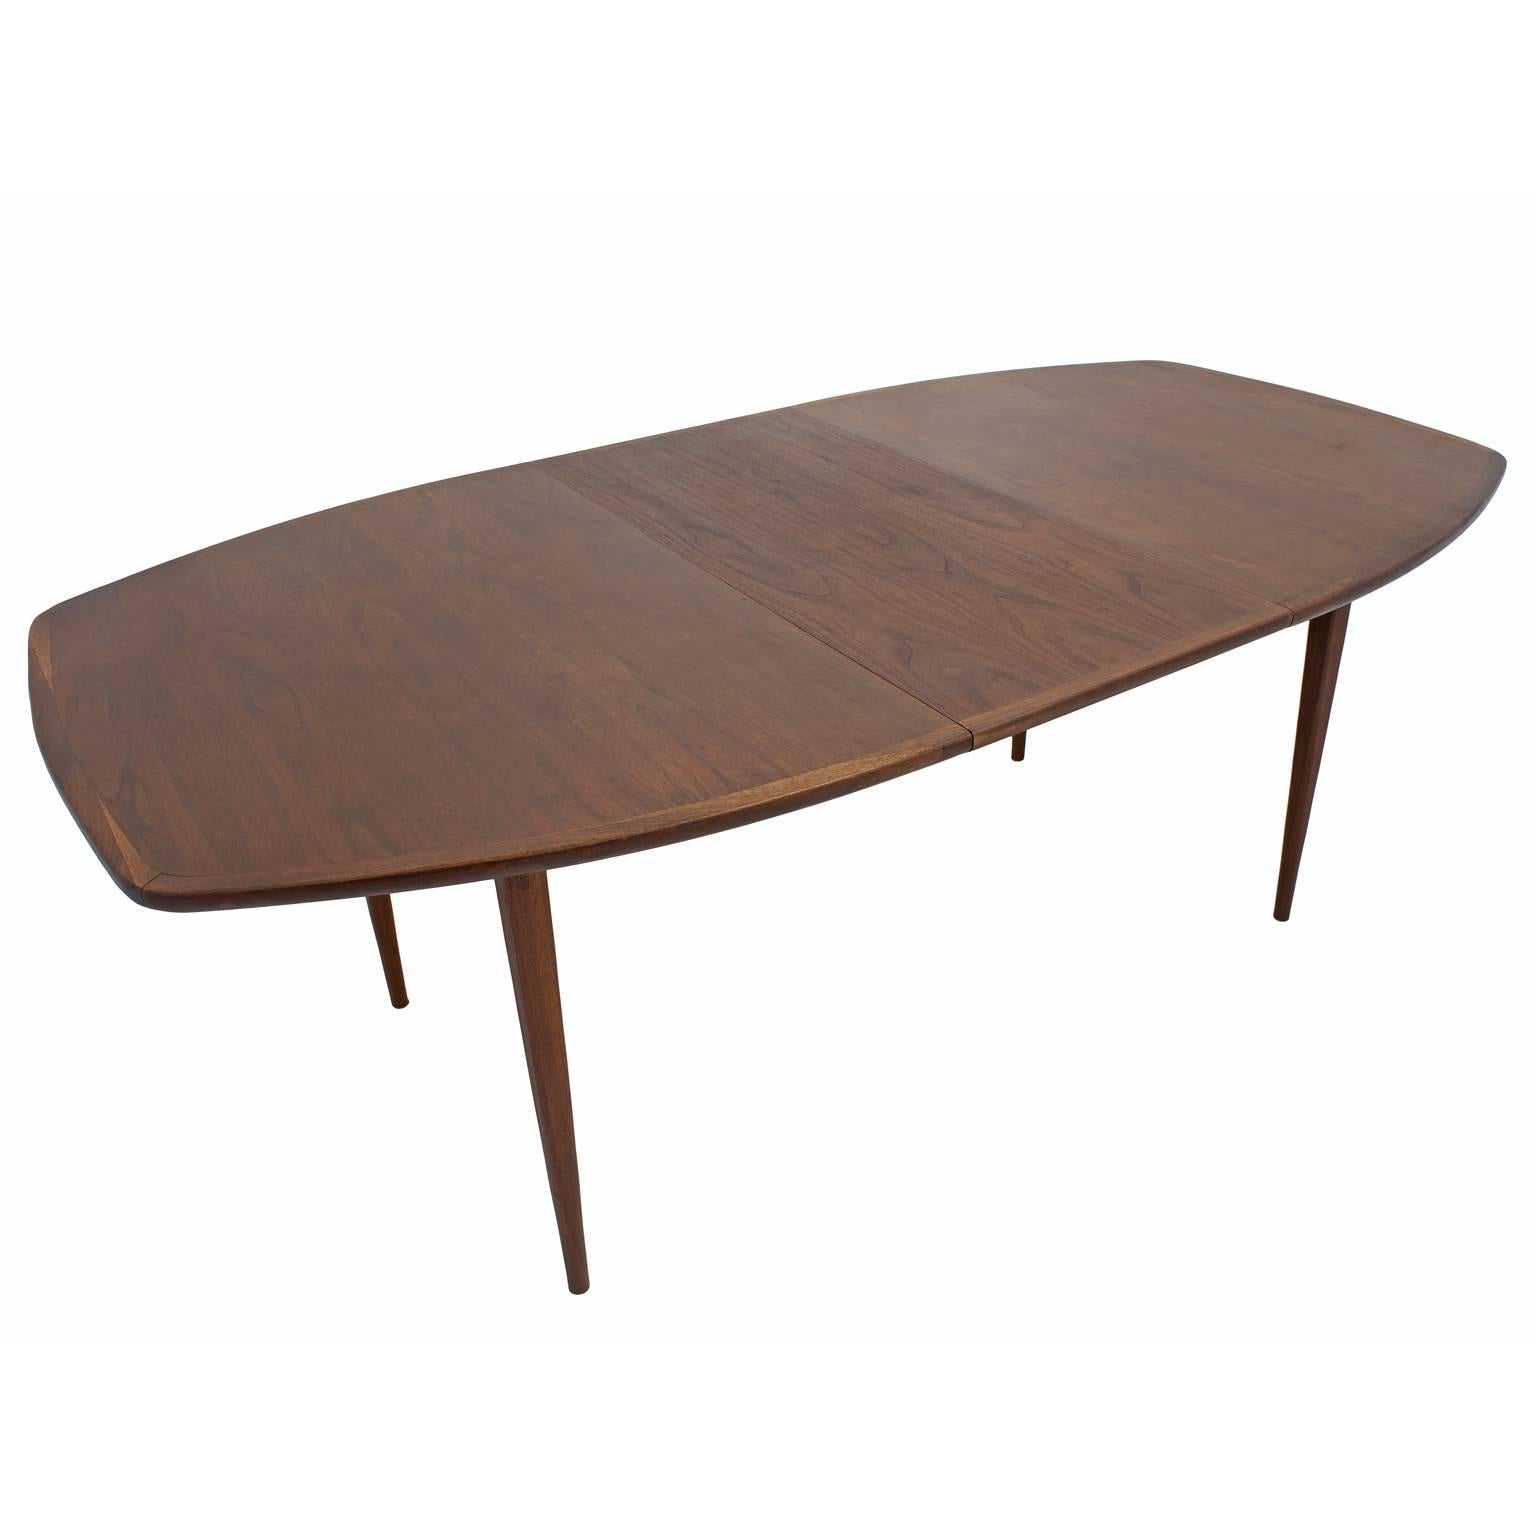 American Mid-Century Solid Walnut Dining Table by Dillingham Attributed to Milo Baughman For Sale